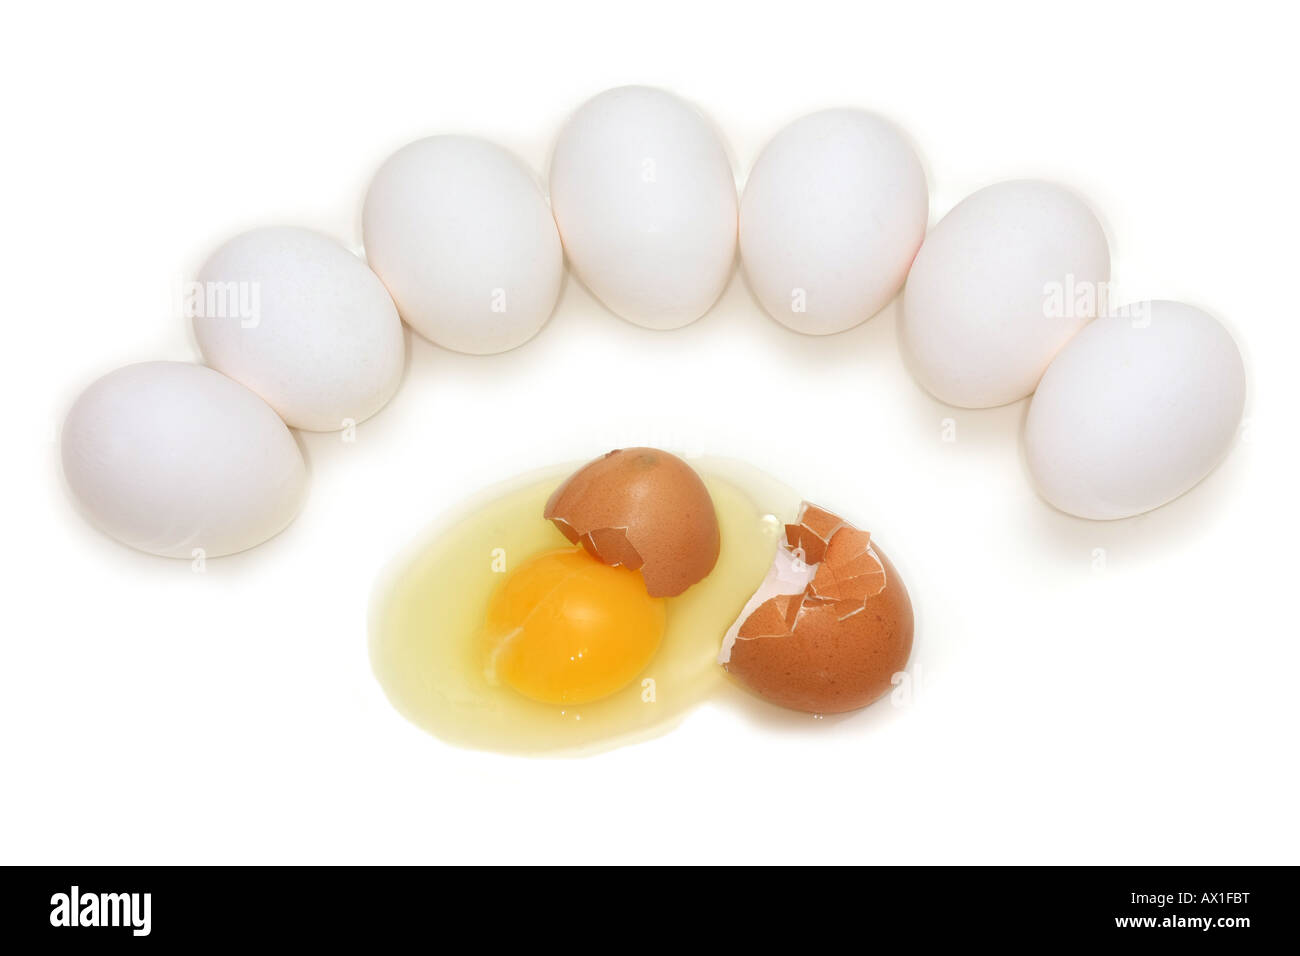 Eggs showing concept for racism, murder, ethnic violence or mobbing. Stock Photo